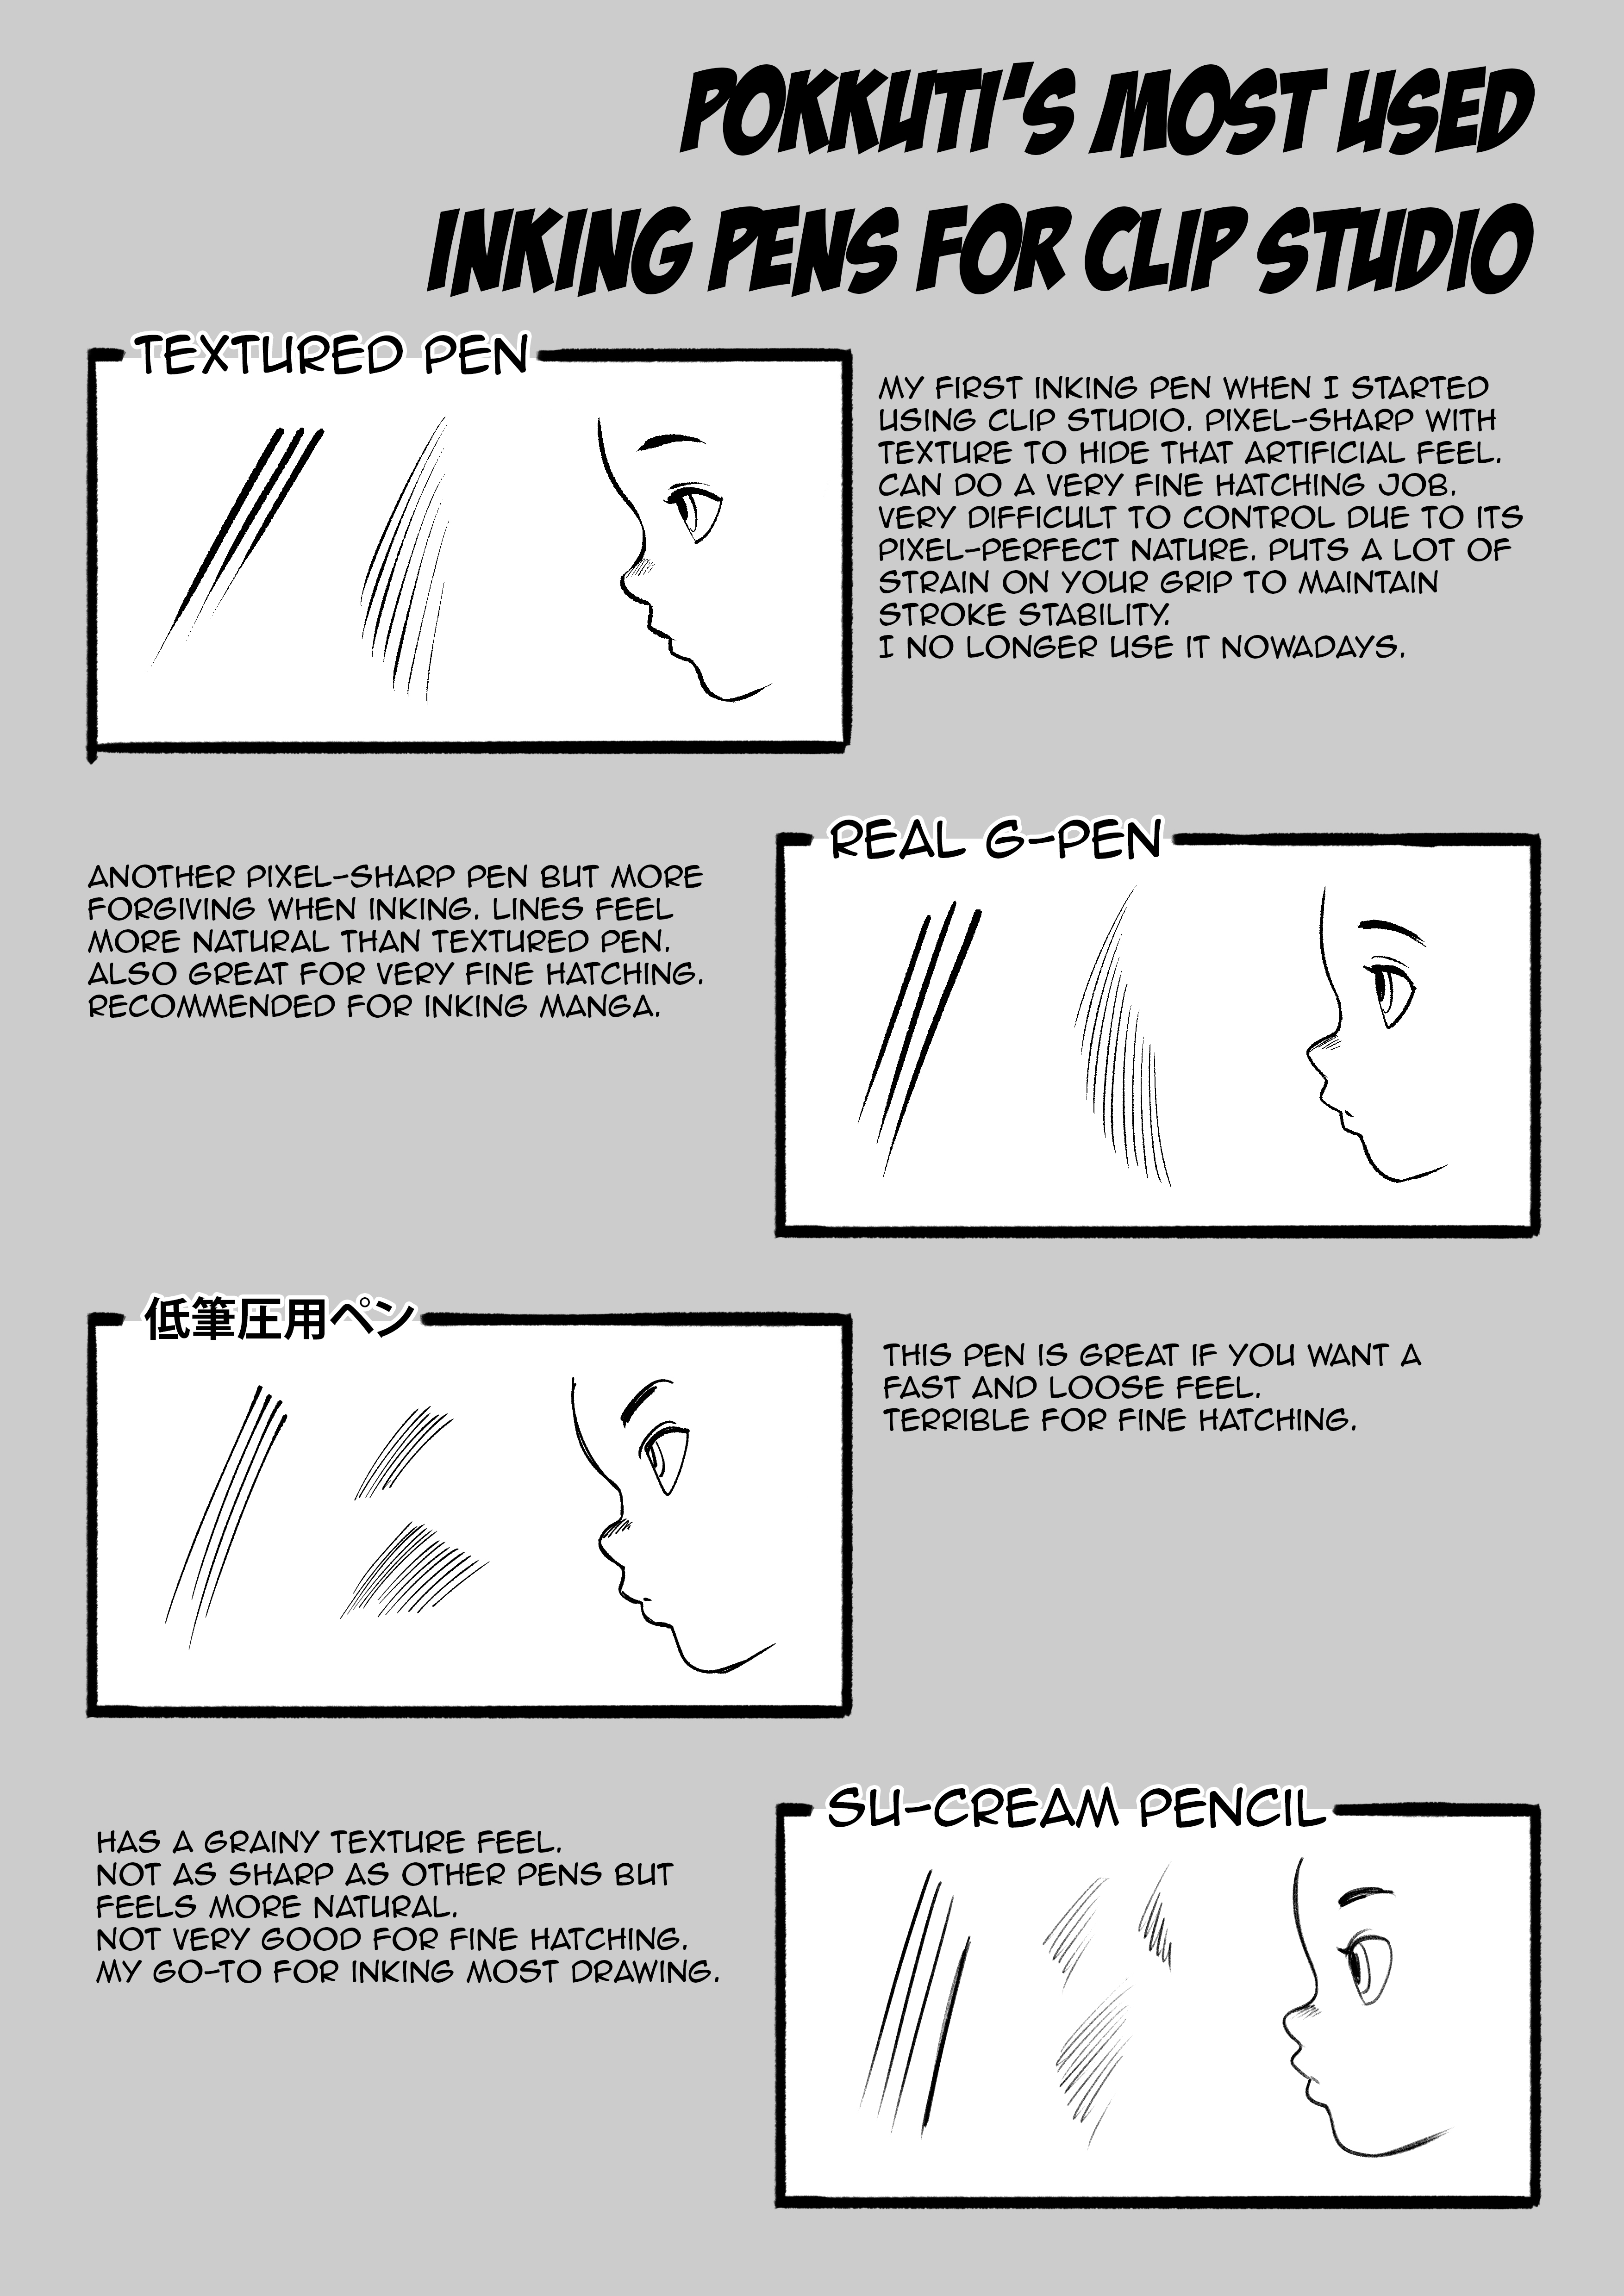 My inking pens for Clip Studio Paint by Pokkuti on DeviantArt